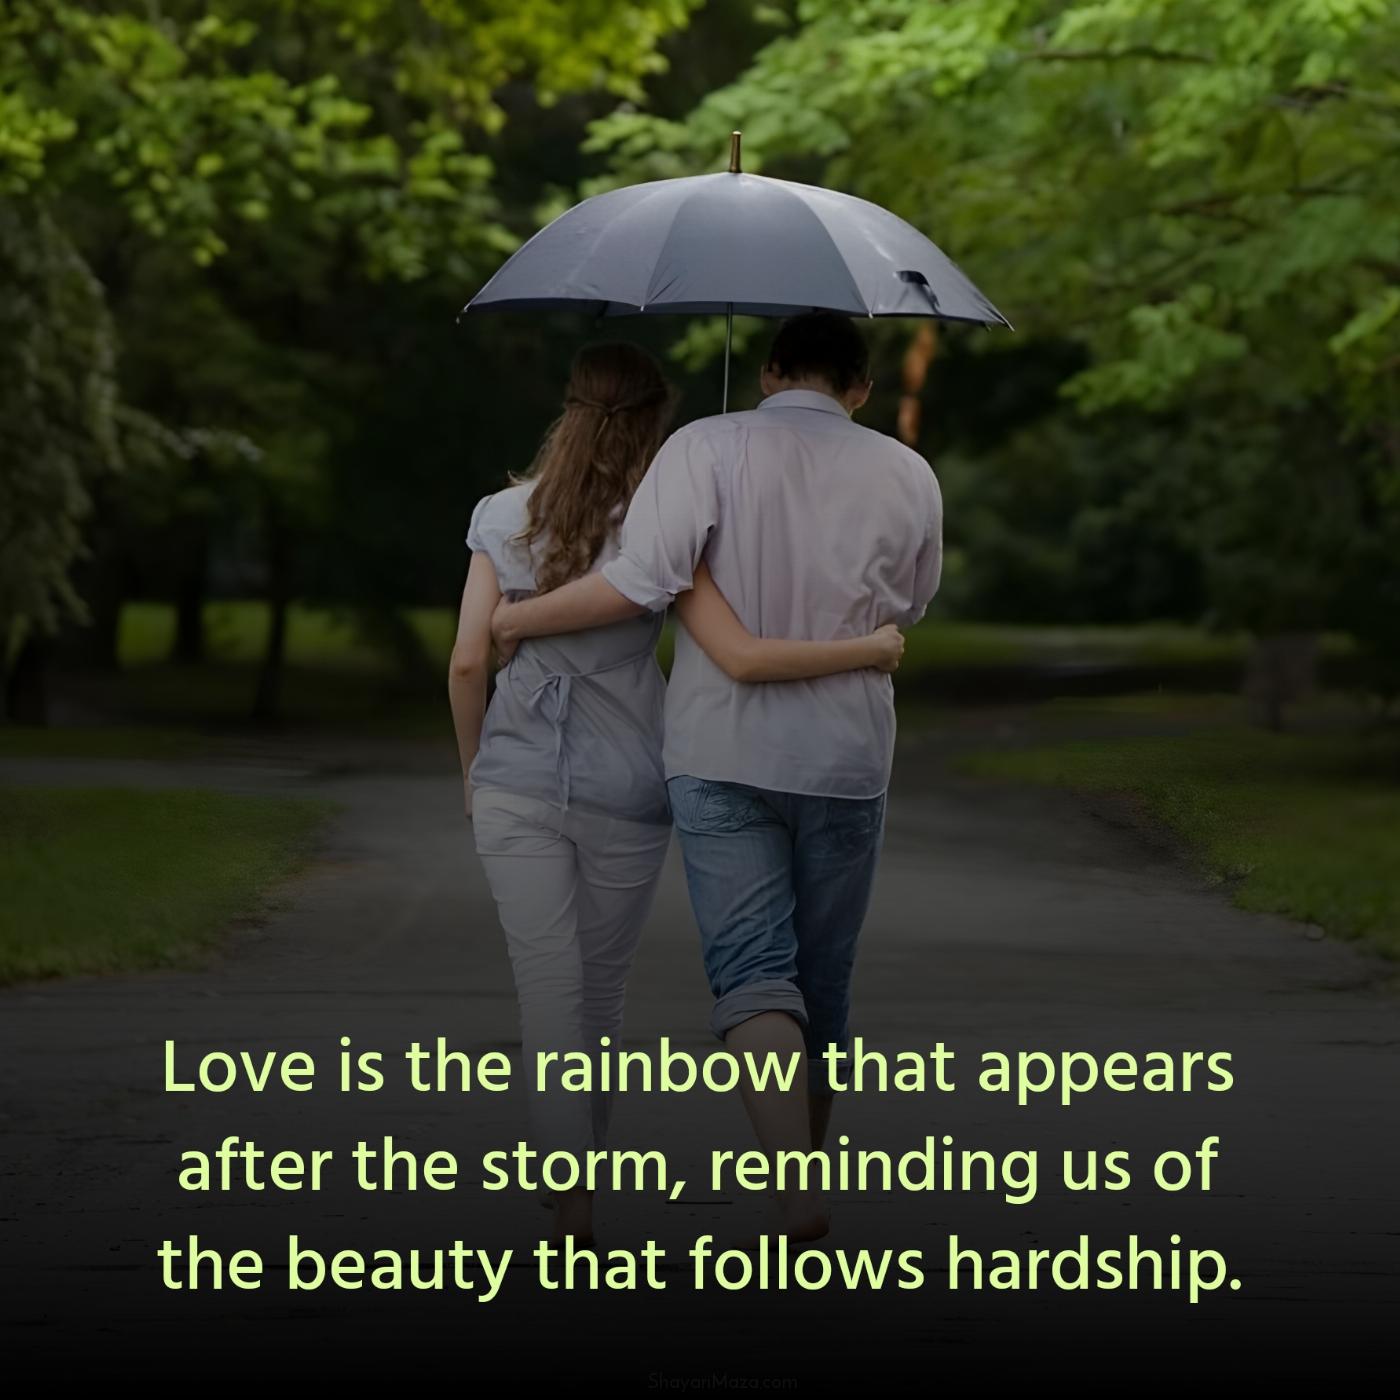 Love is the rainbow that appears after the storm